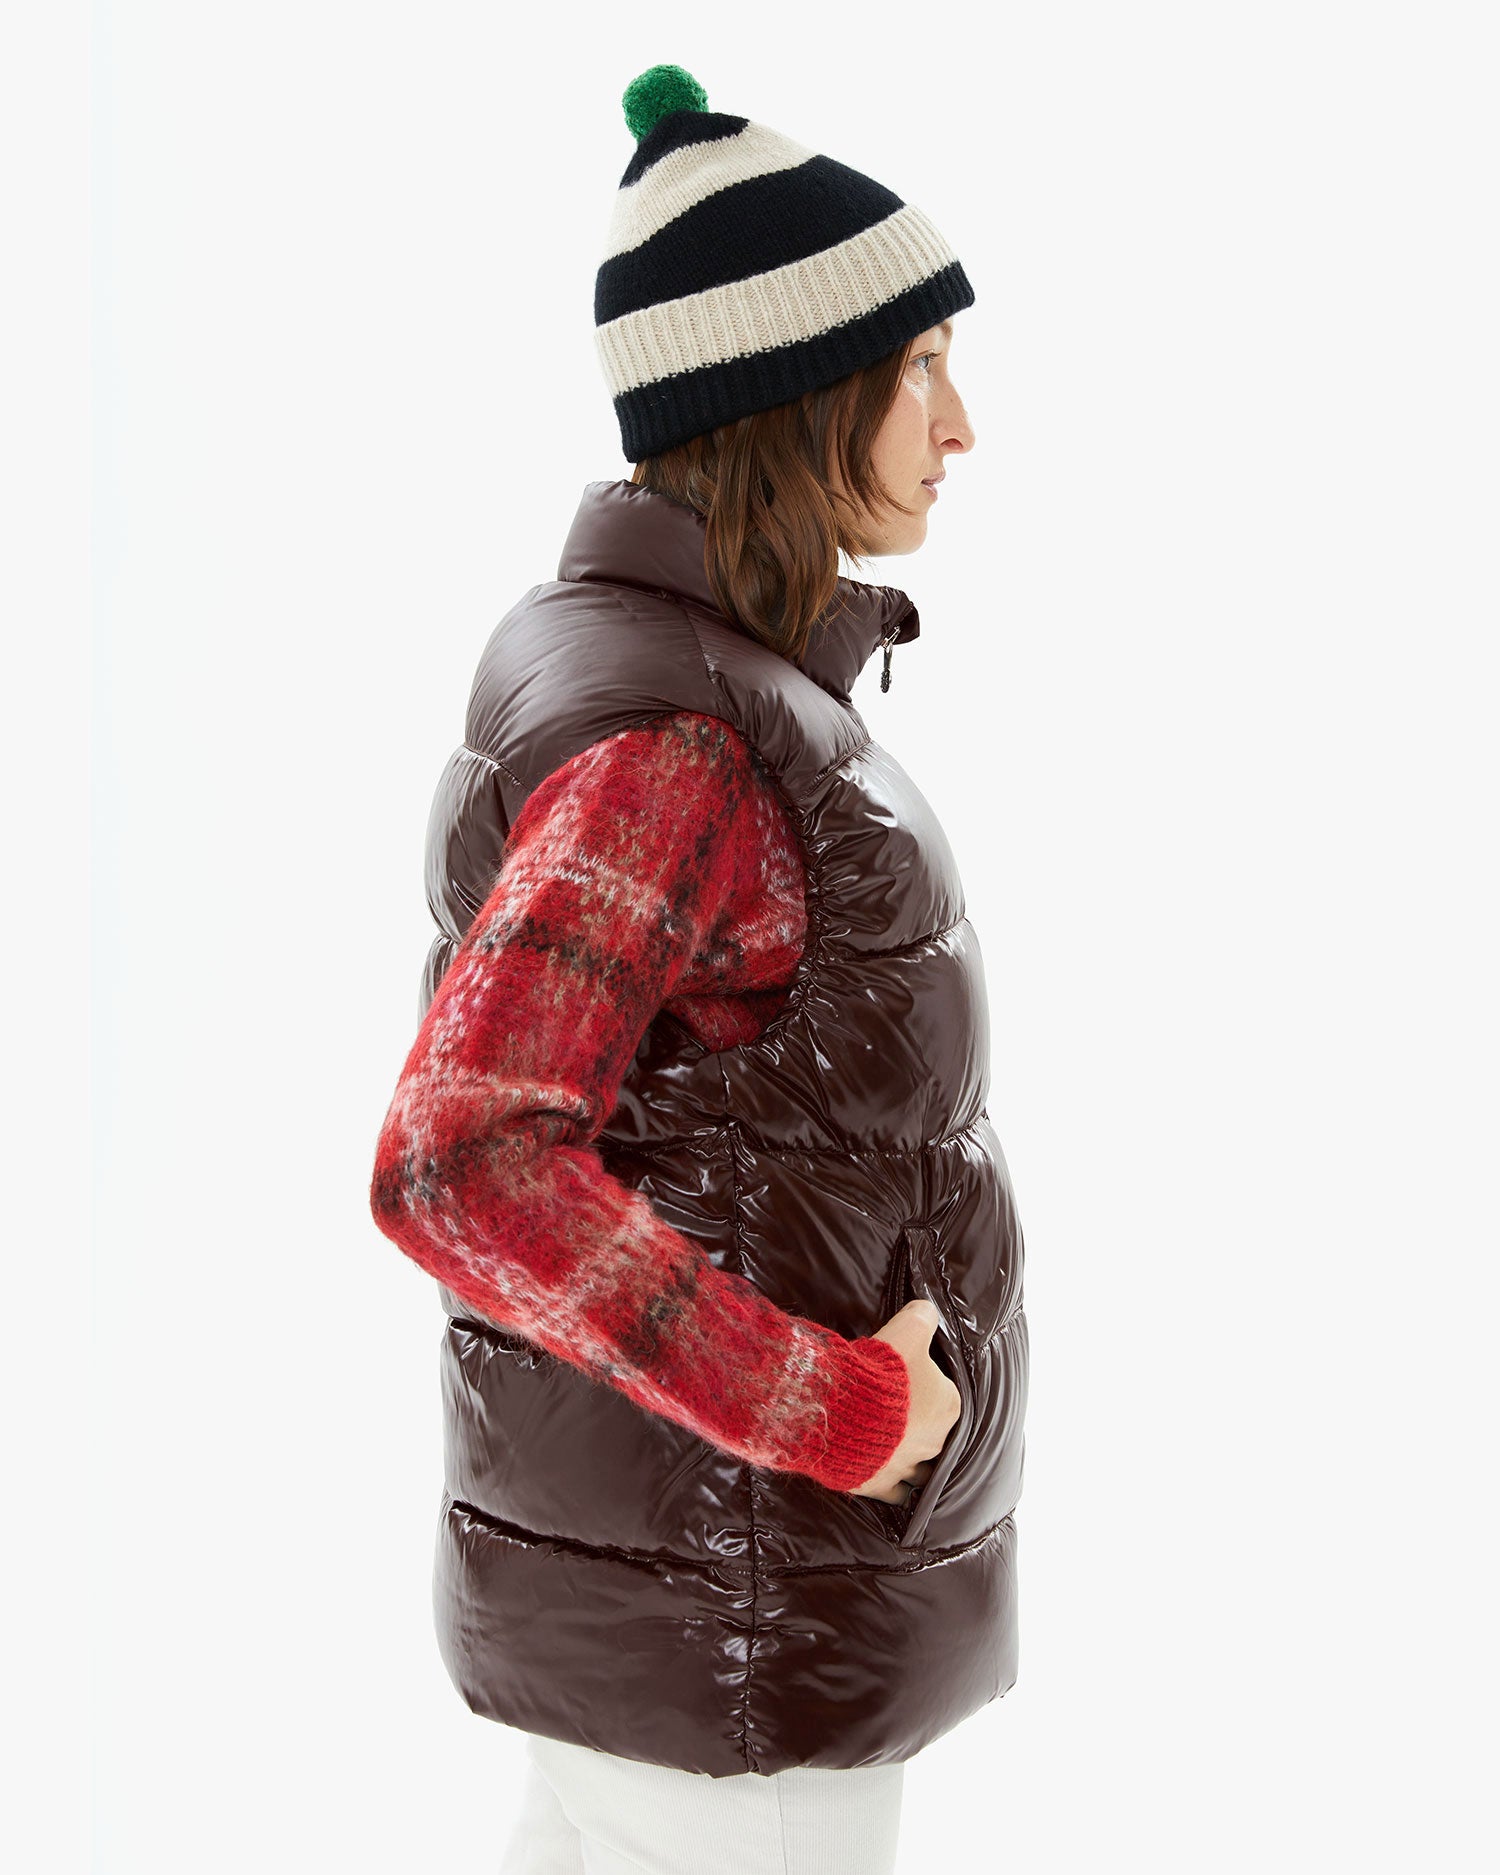 Model wearing the Stripe Pompom Hat in Black and Oatmeal with a puffy vest